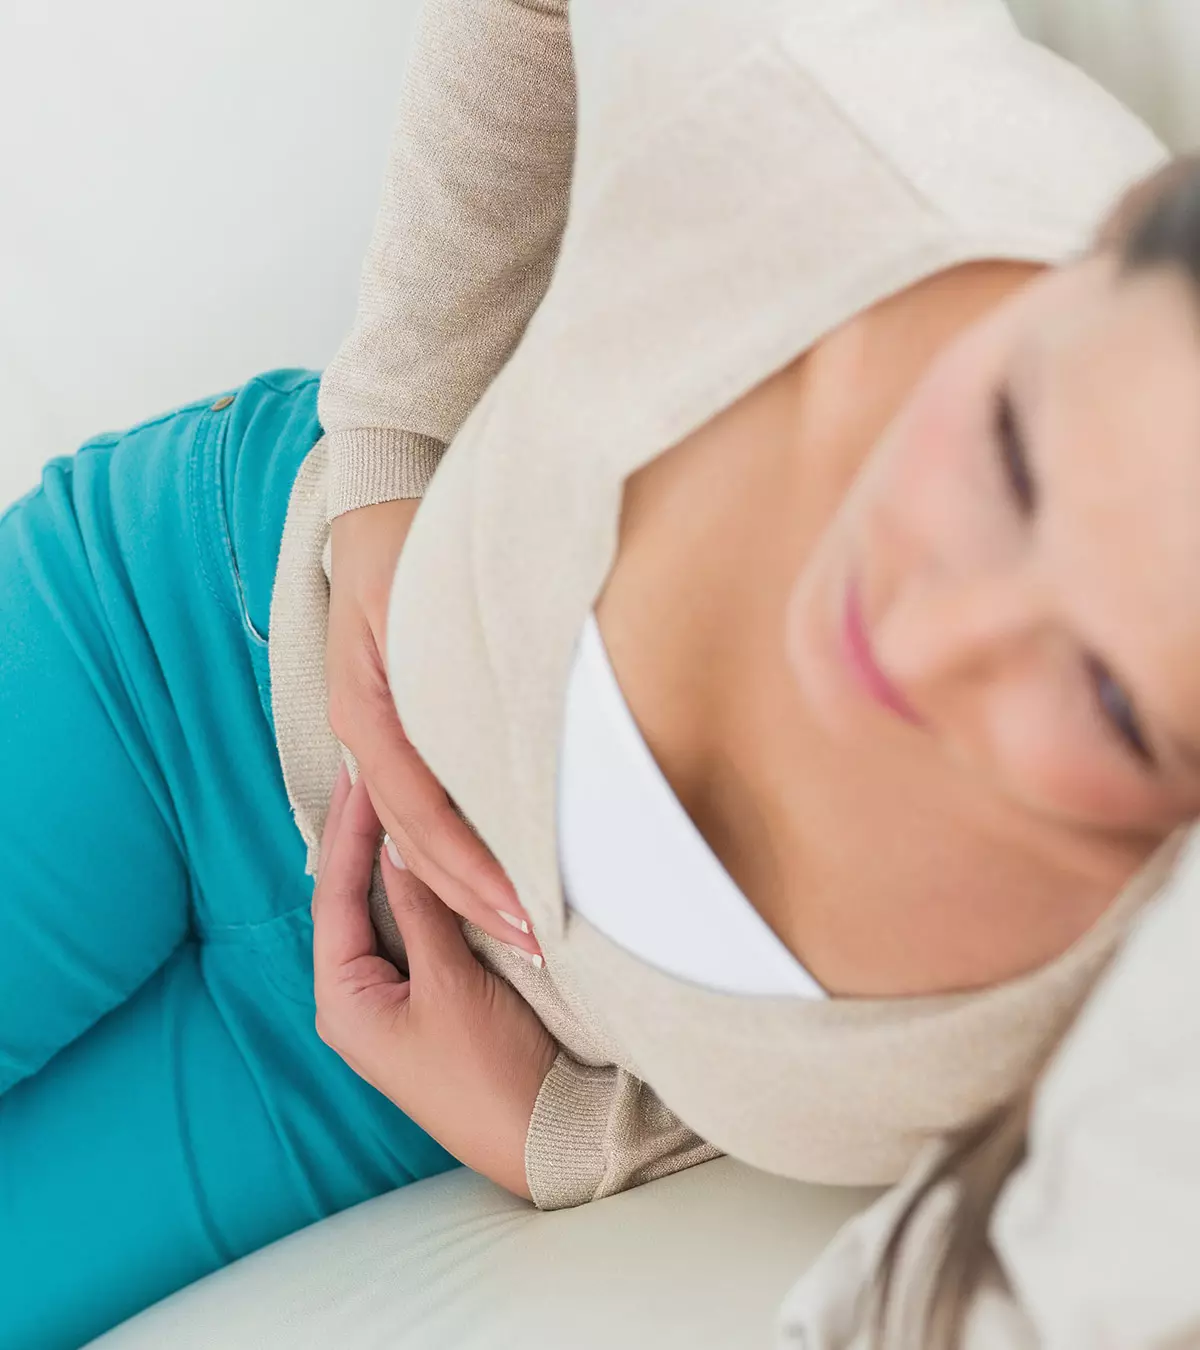 IBS or UTIs are probable causes of pain in the abdominal area.